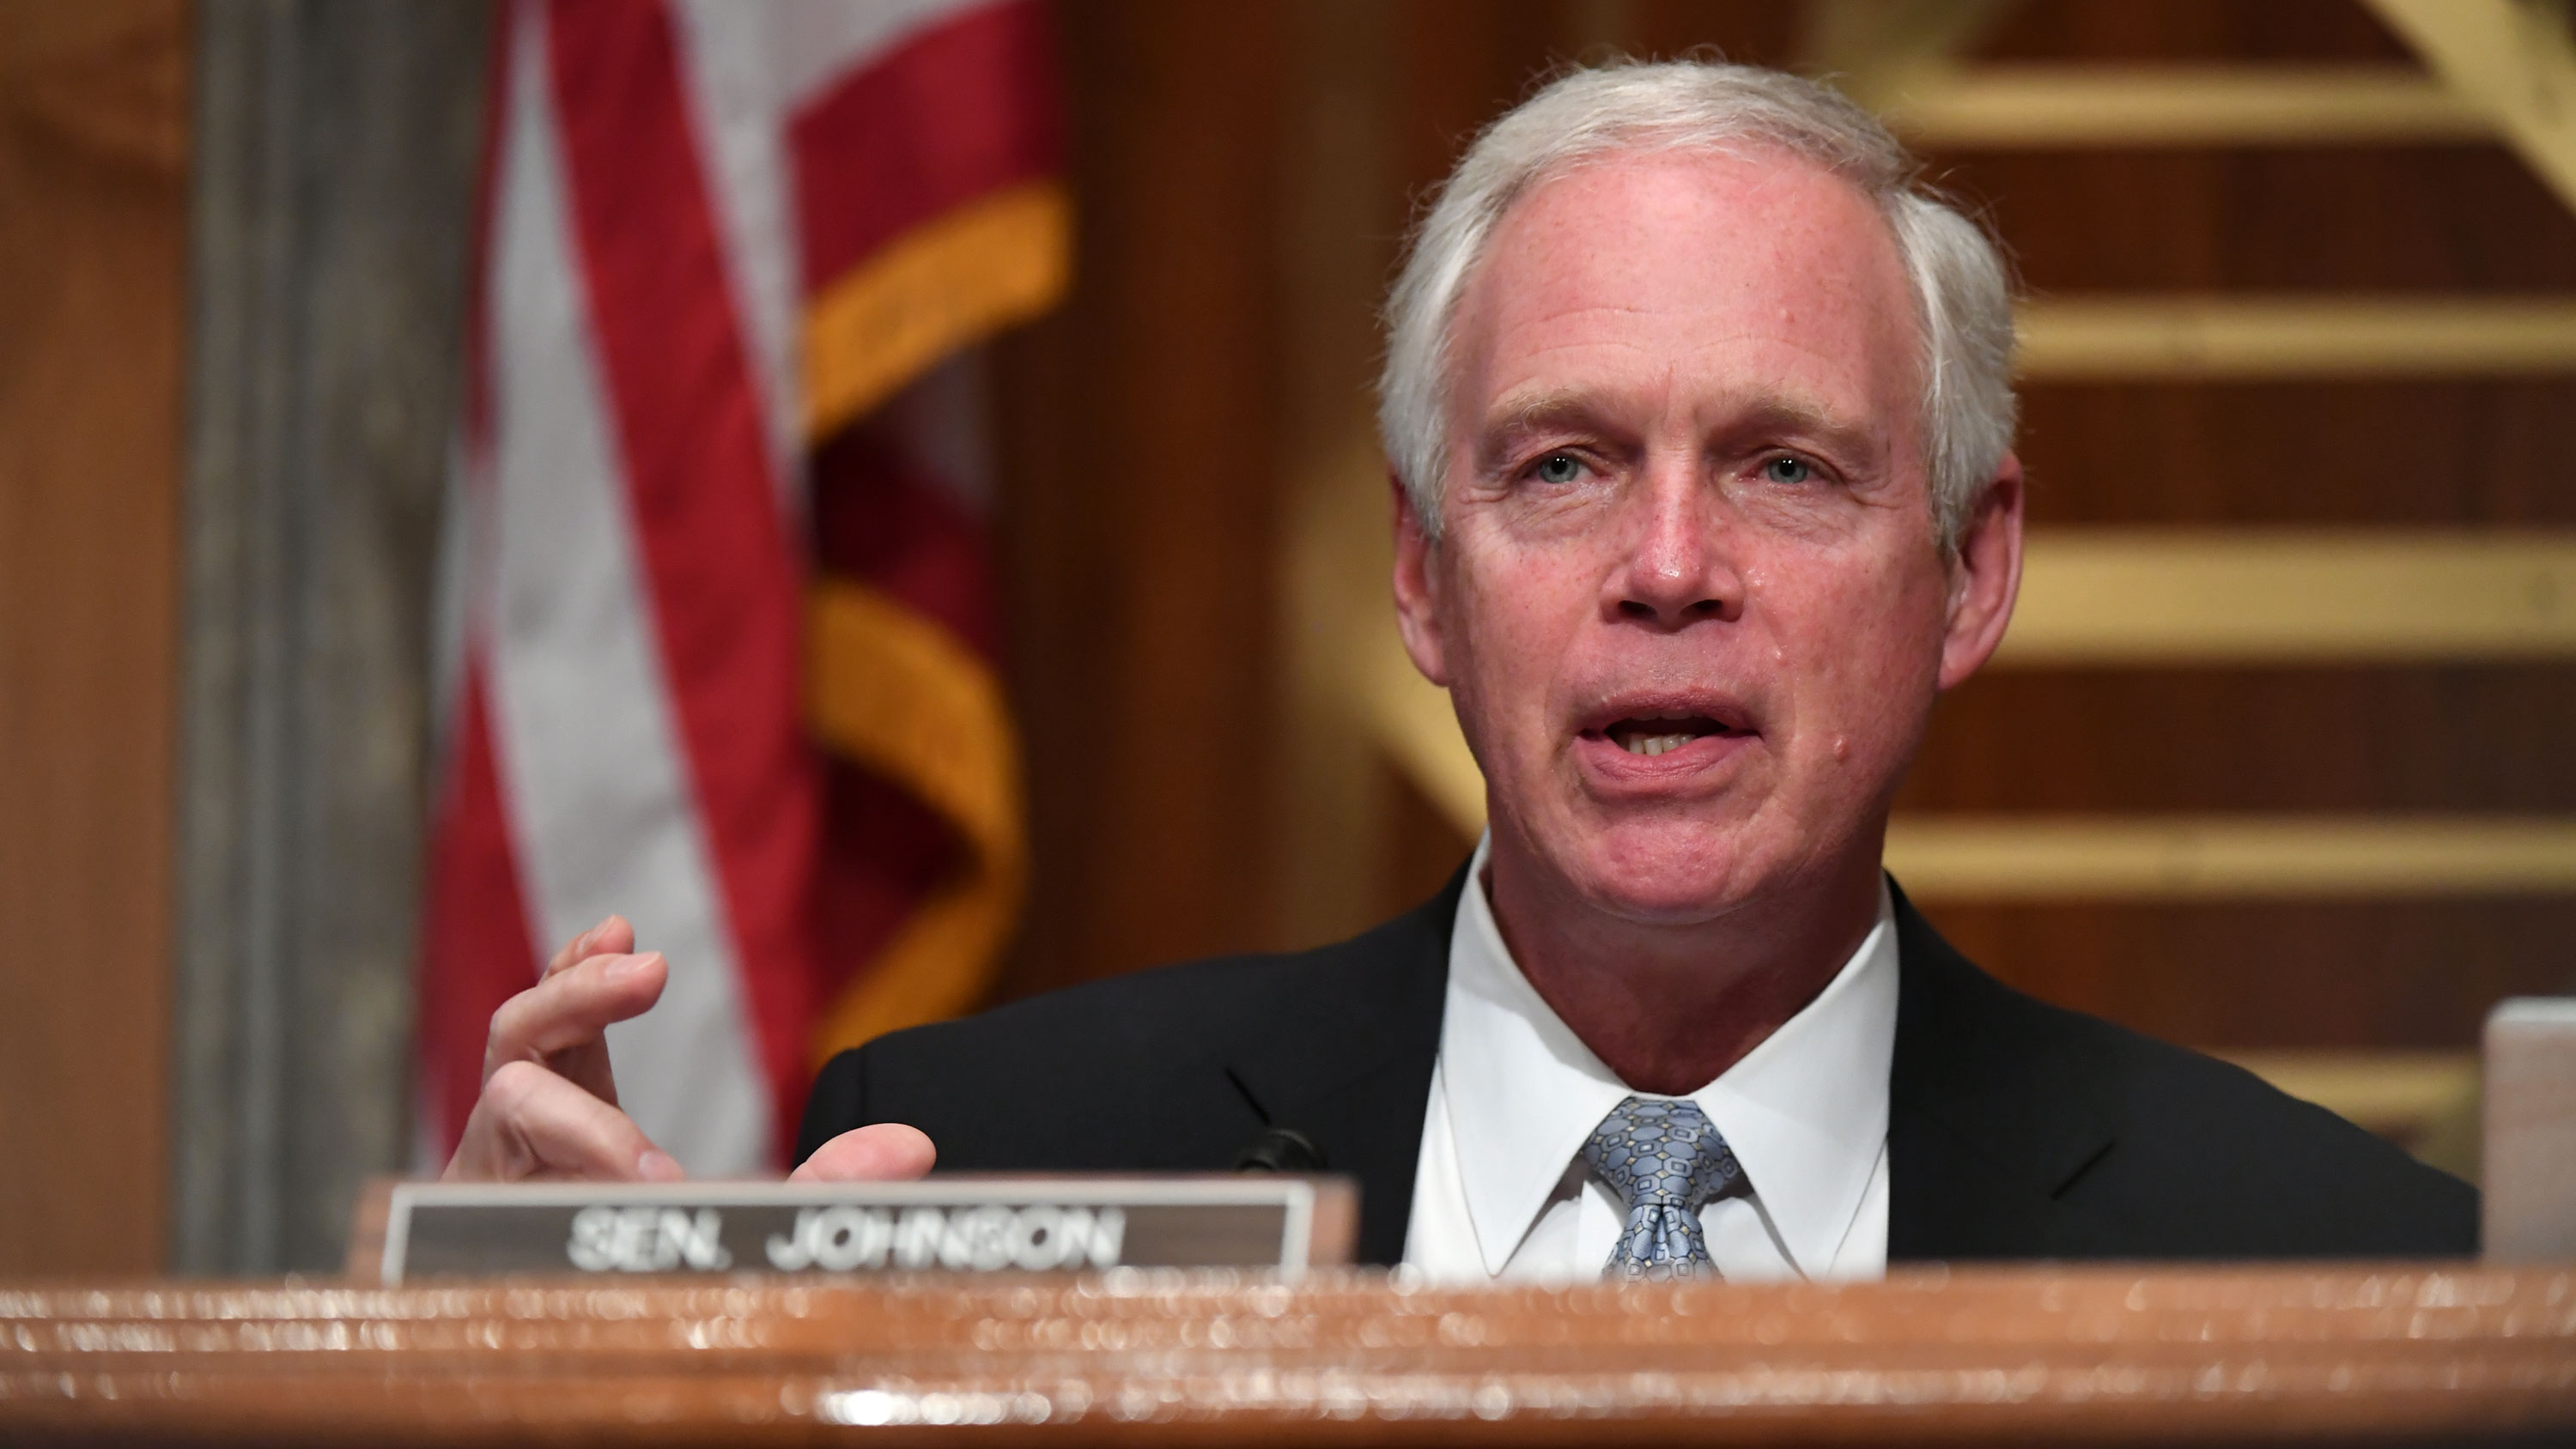 Sen. Ron Johnson speaks during a hearing on Capitol Hill on August 6.